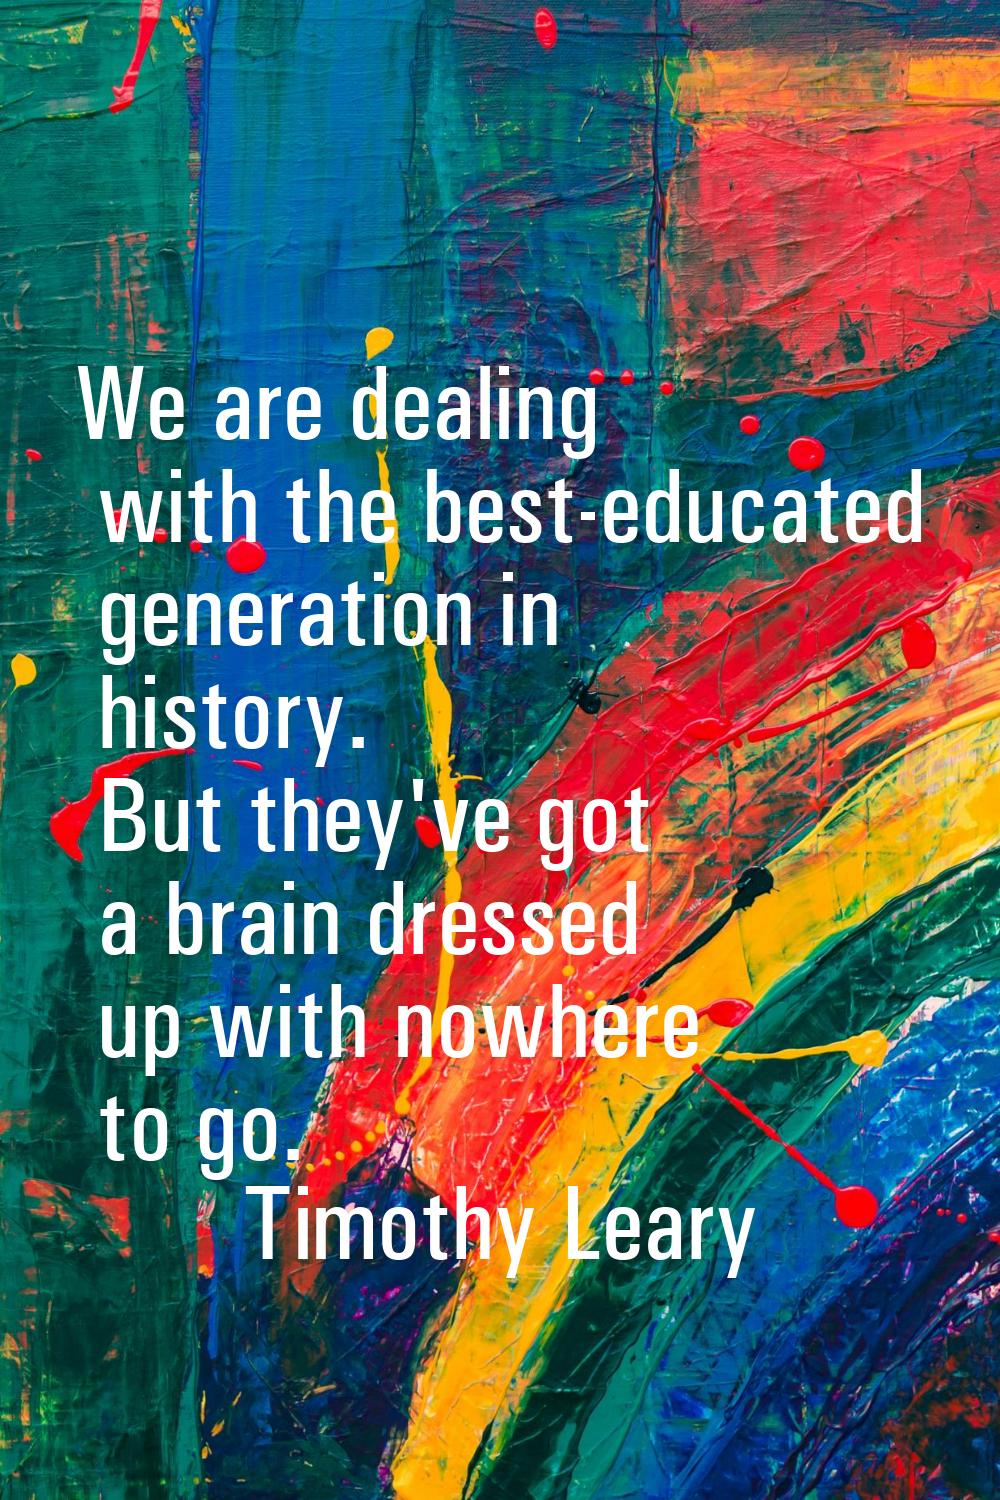 We are dealing with the best-educated generation in history. But they've got a brain dressed up wit